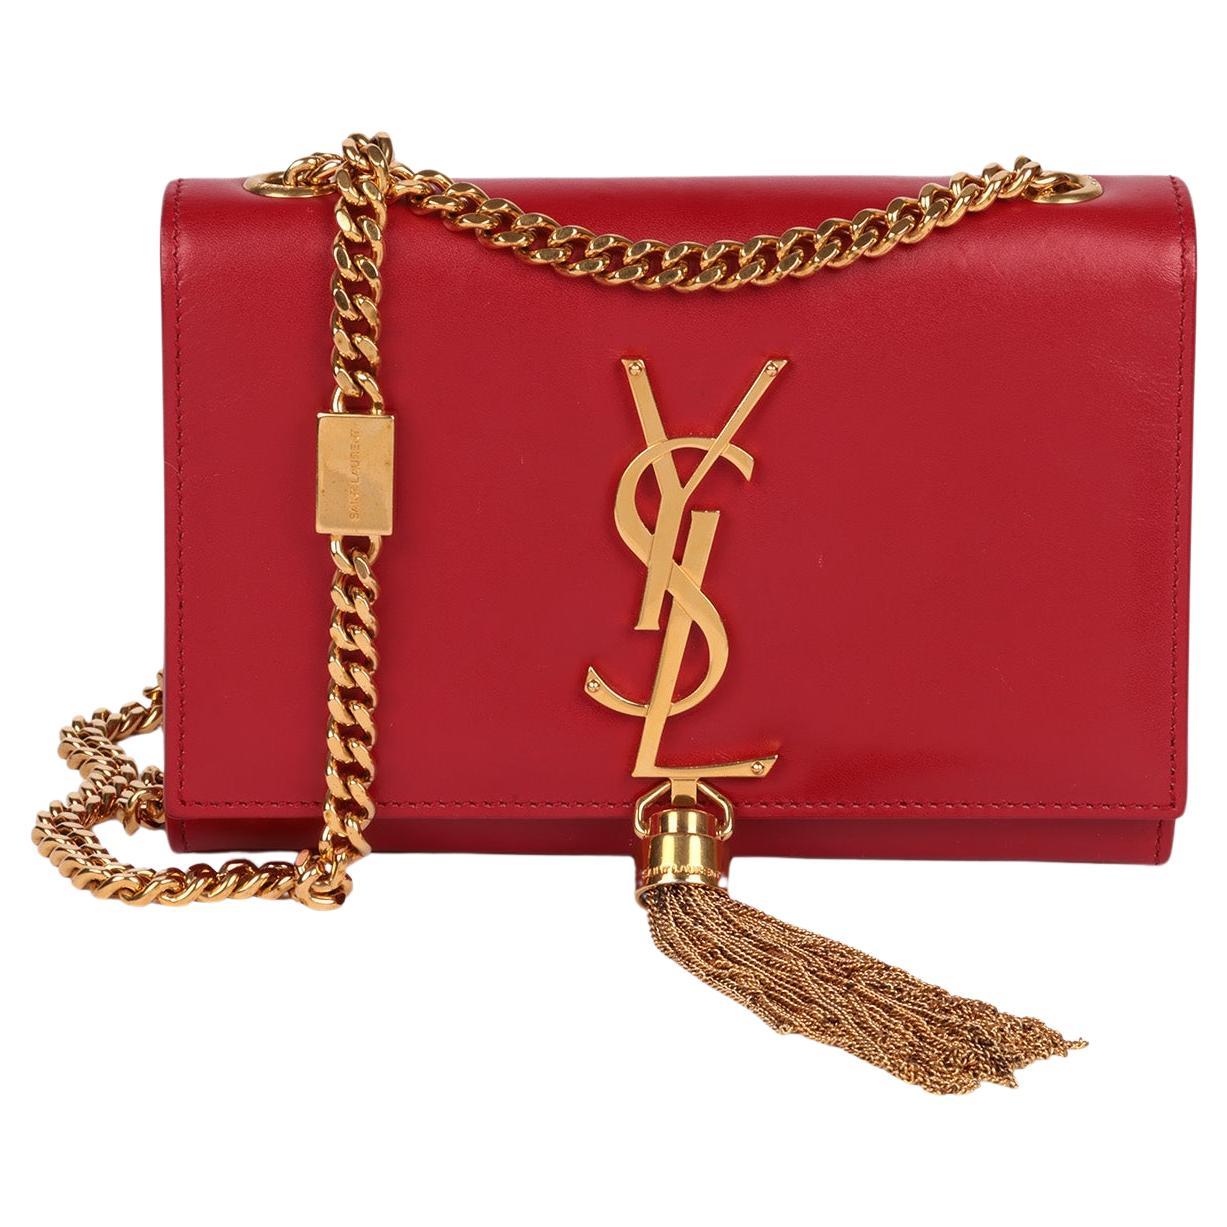 Can Saint Laurent purse chains be adjusted?